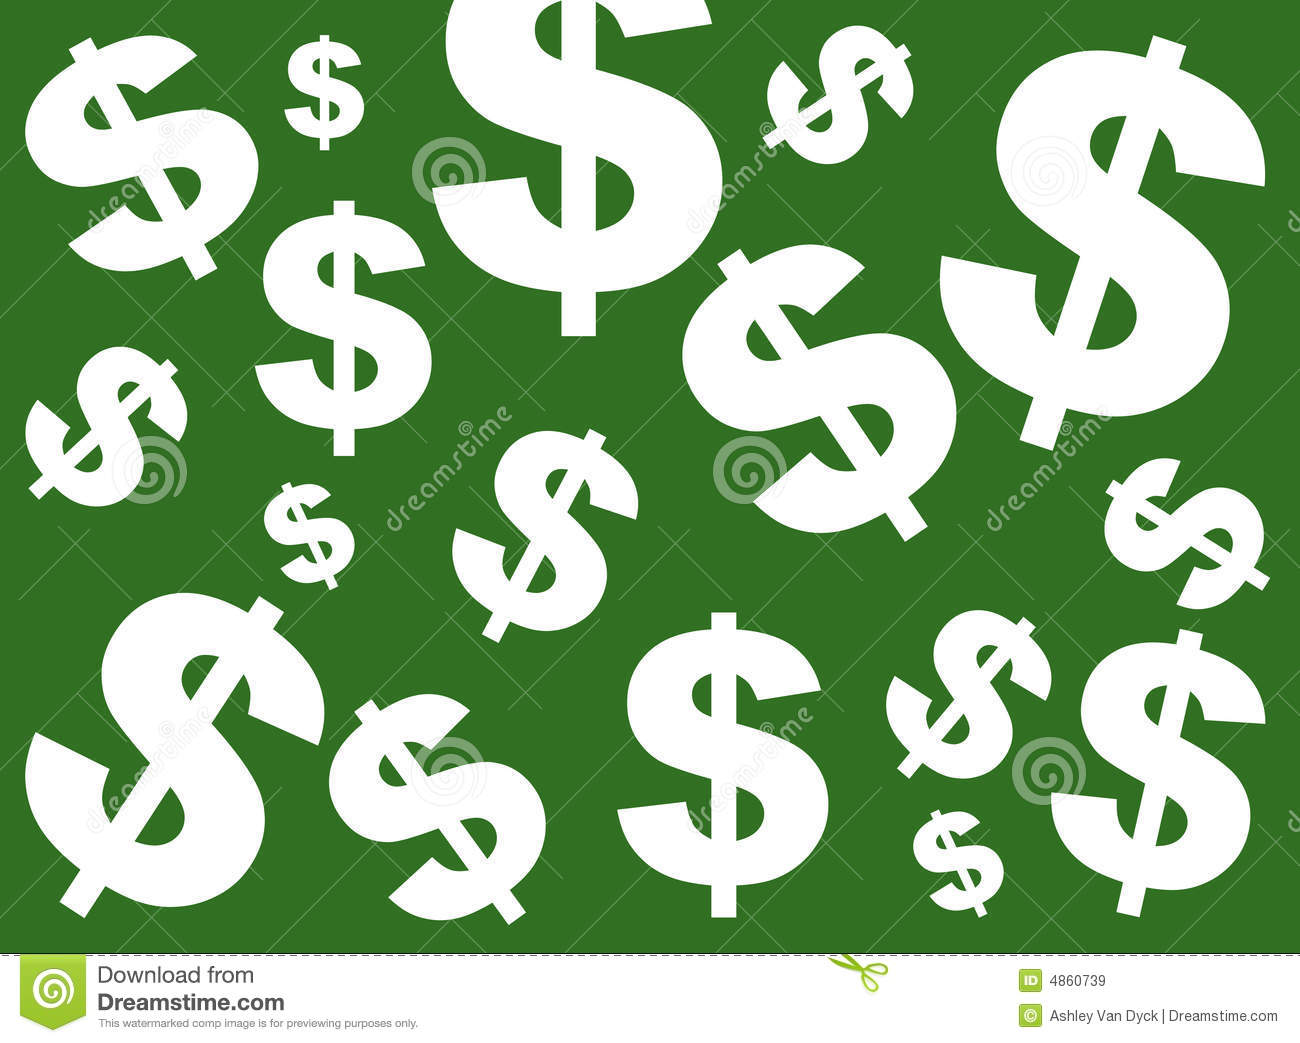 Green Dollar Sign Background Royalty Free Stock Images   Image